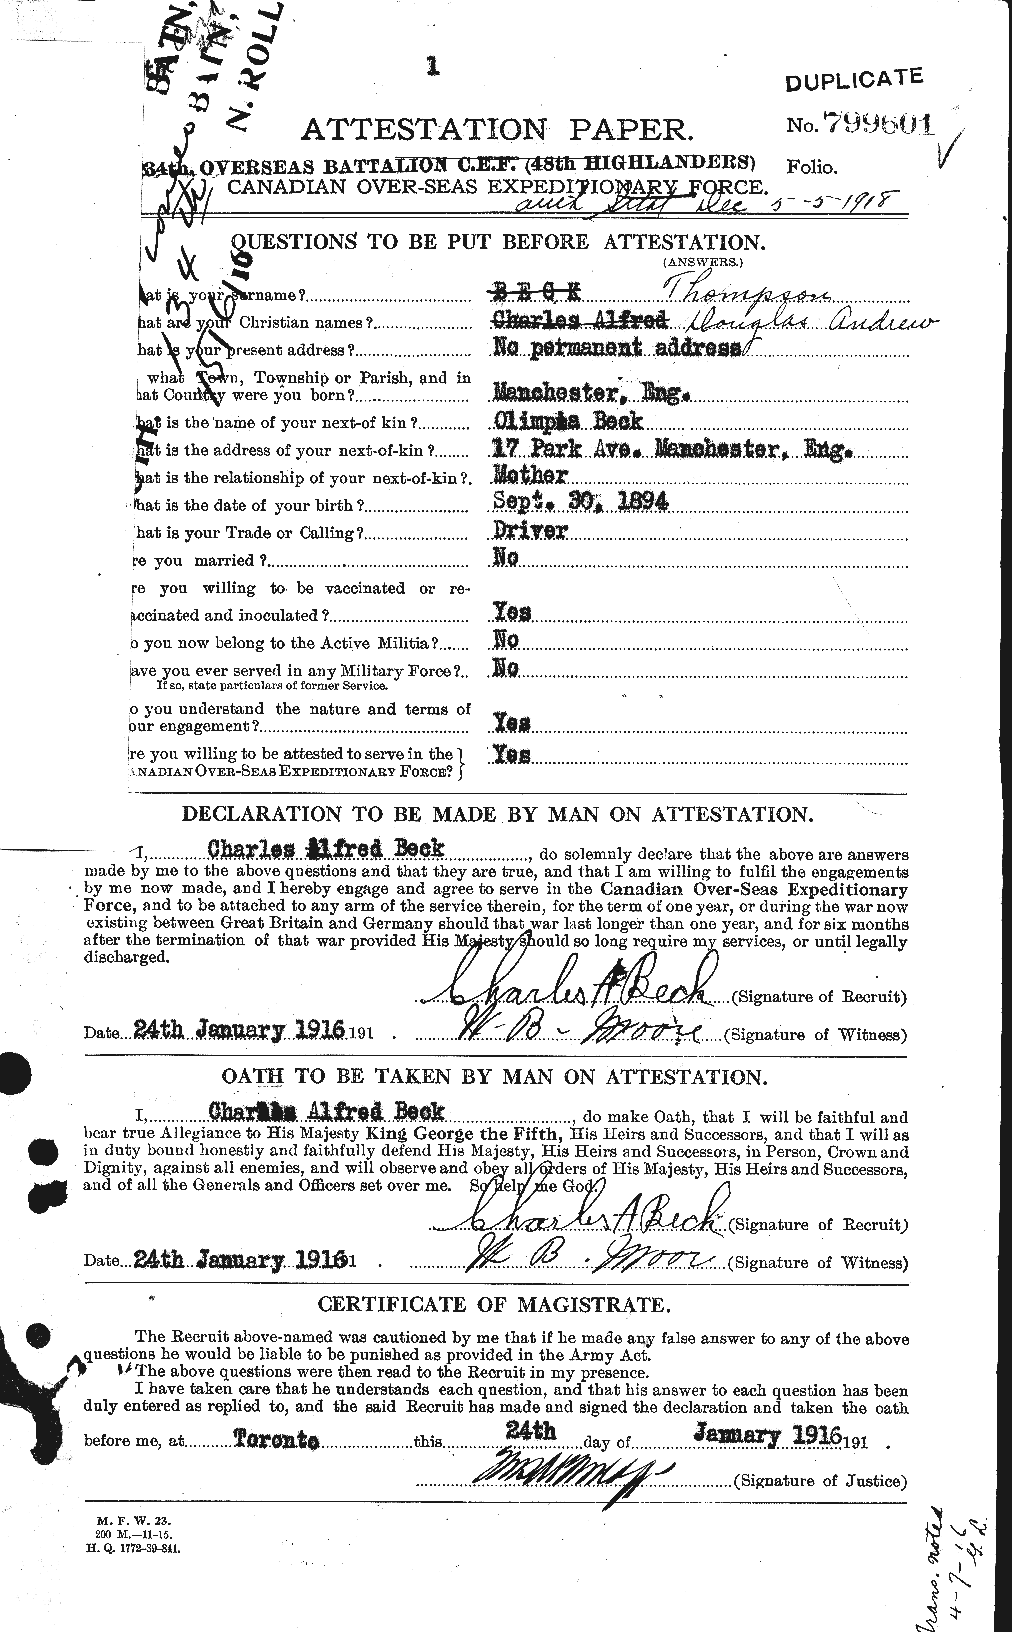 Personnel Records of the First World War - CEF 232090a